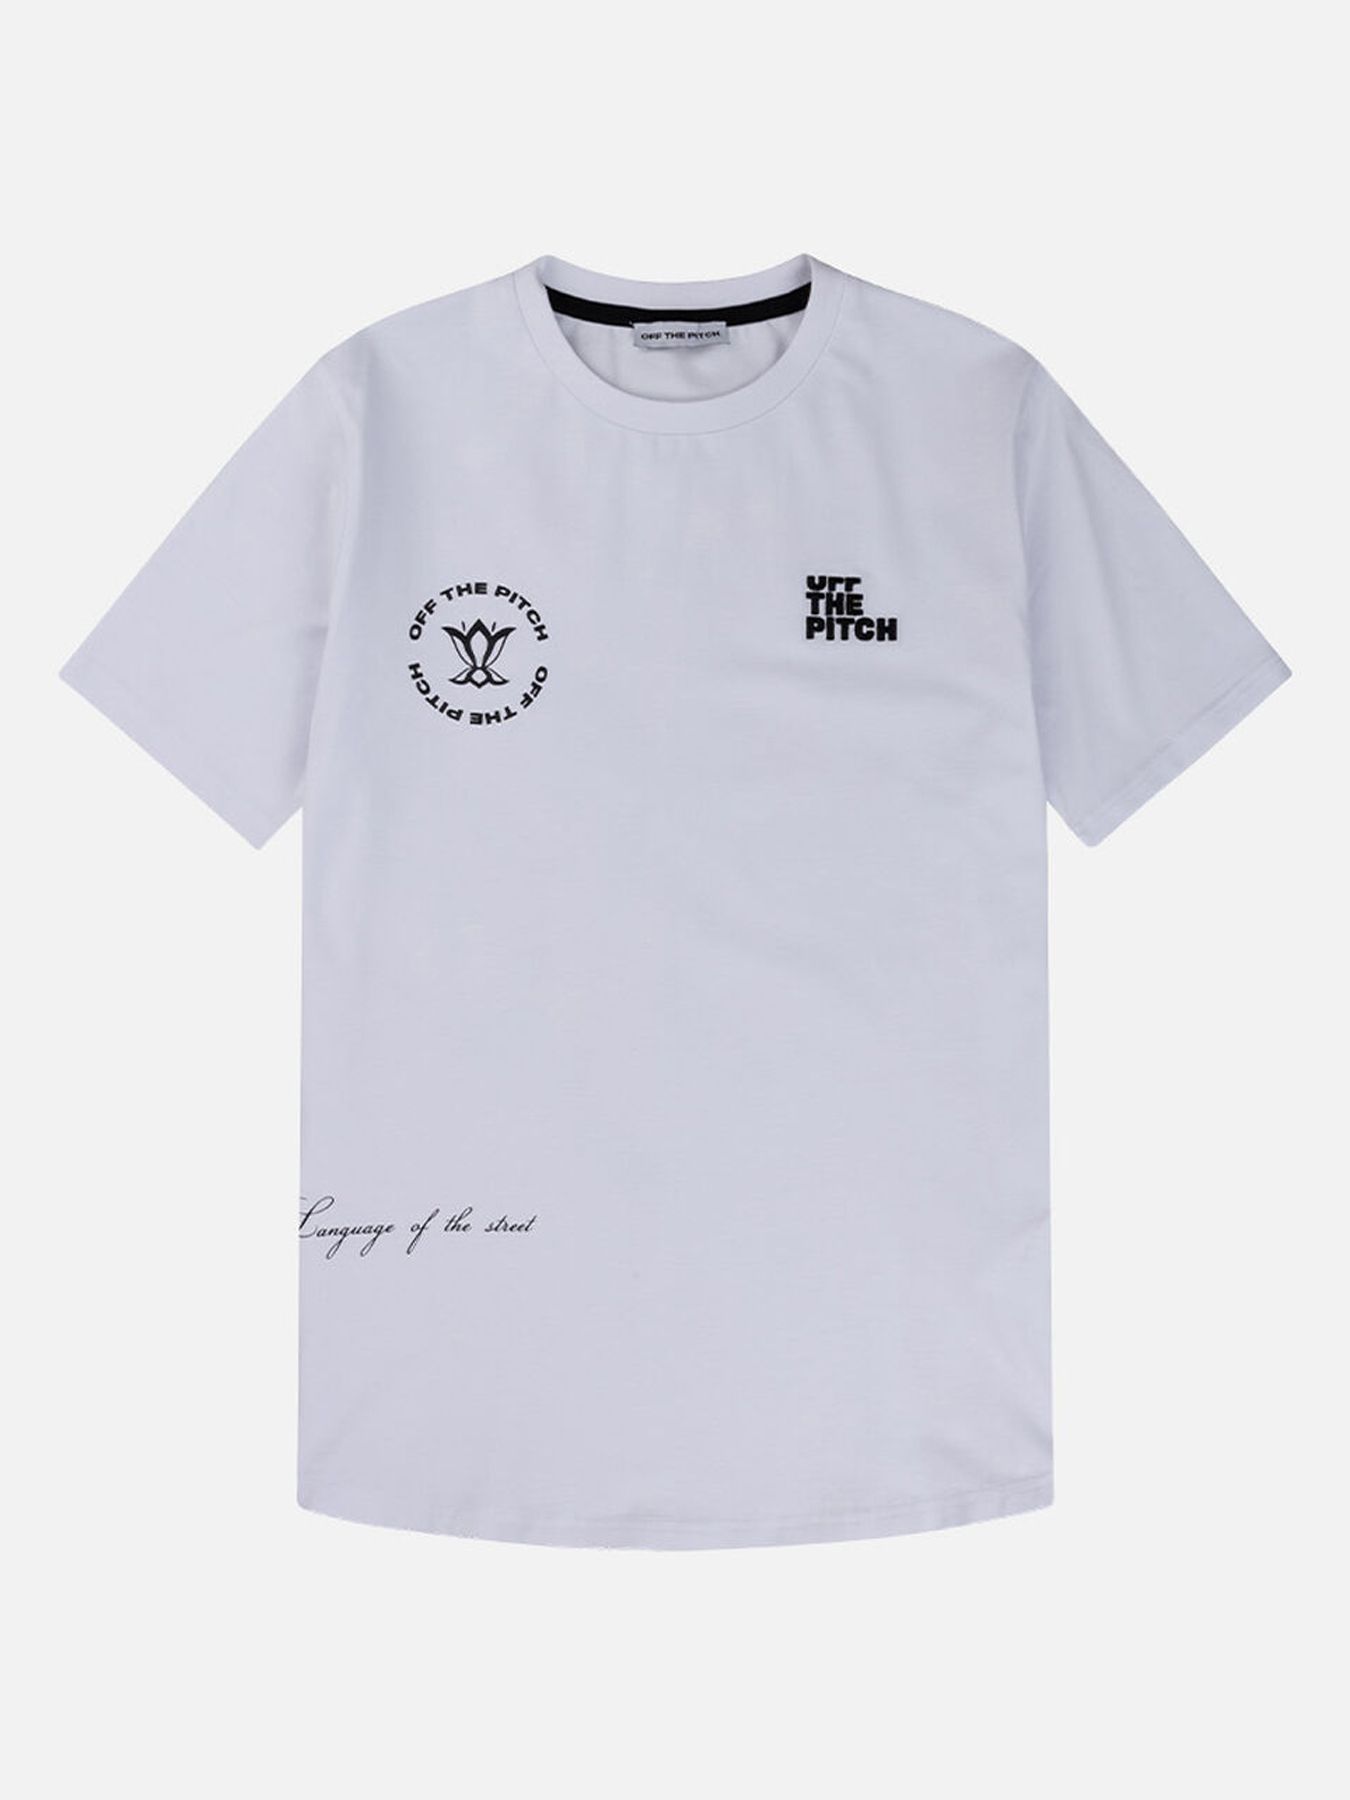 Off The Pitch Generation slim fit tee White 2900147010062